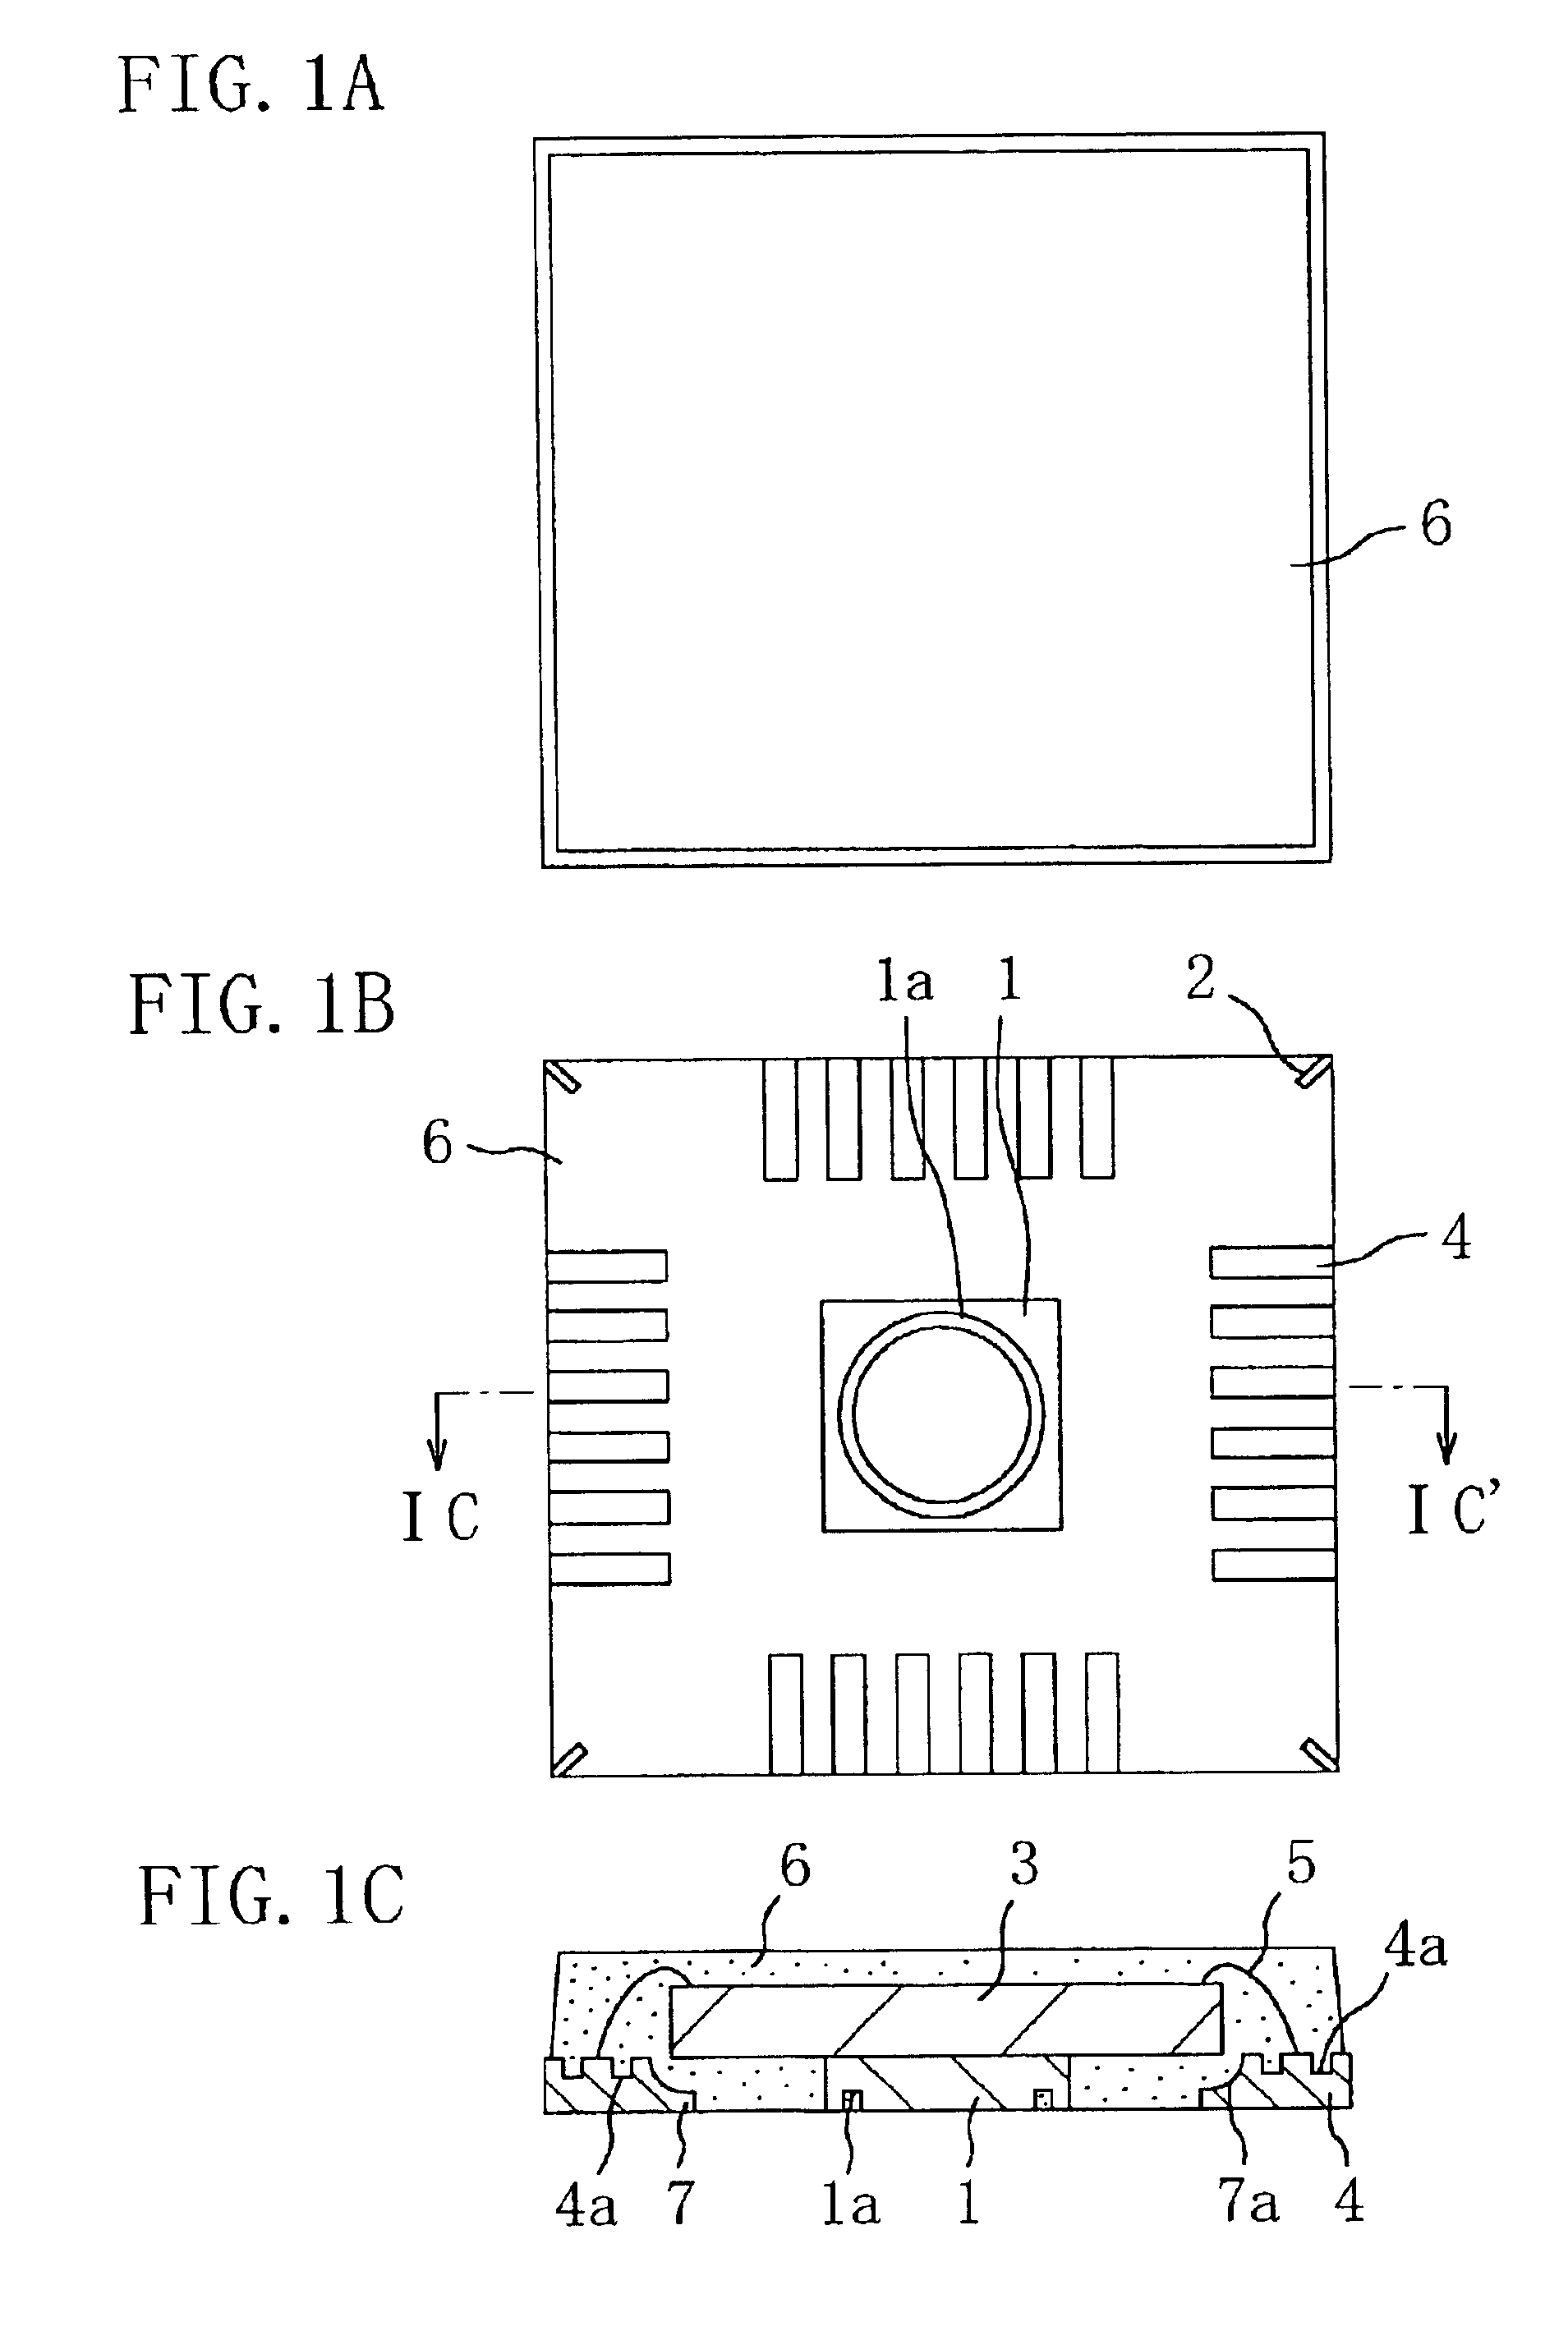 Resin encapsulation semiconductor device utilizing grooved leads and die pad